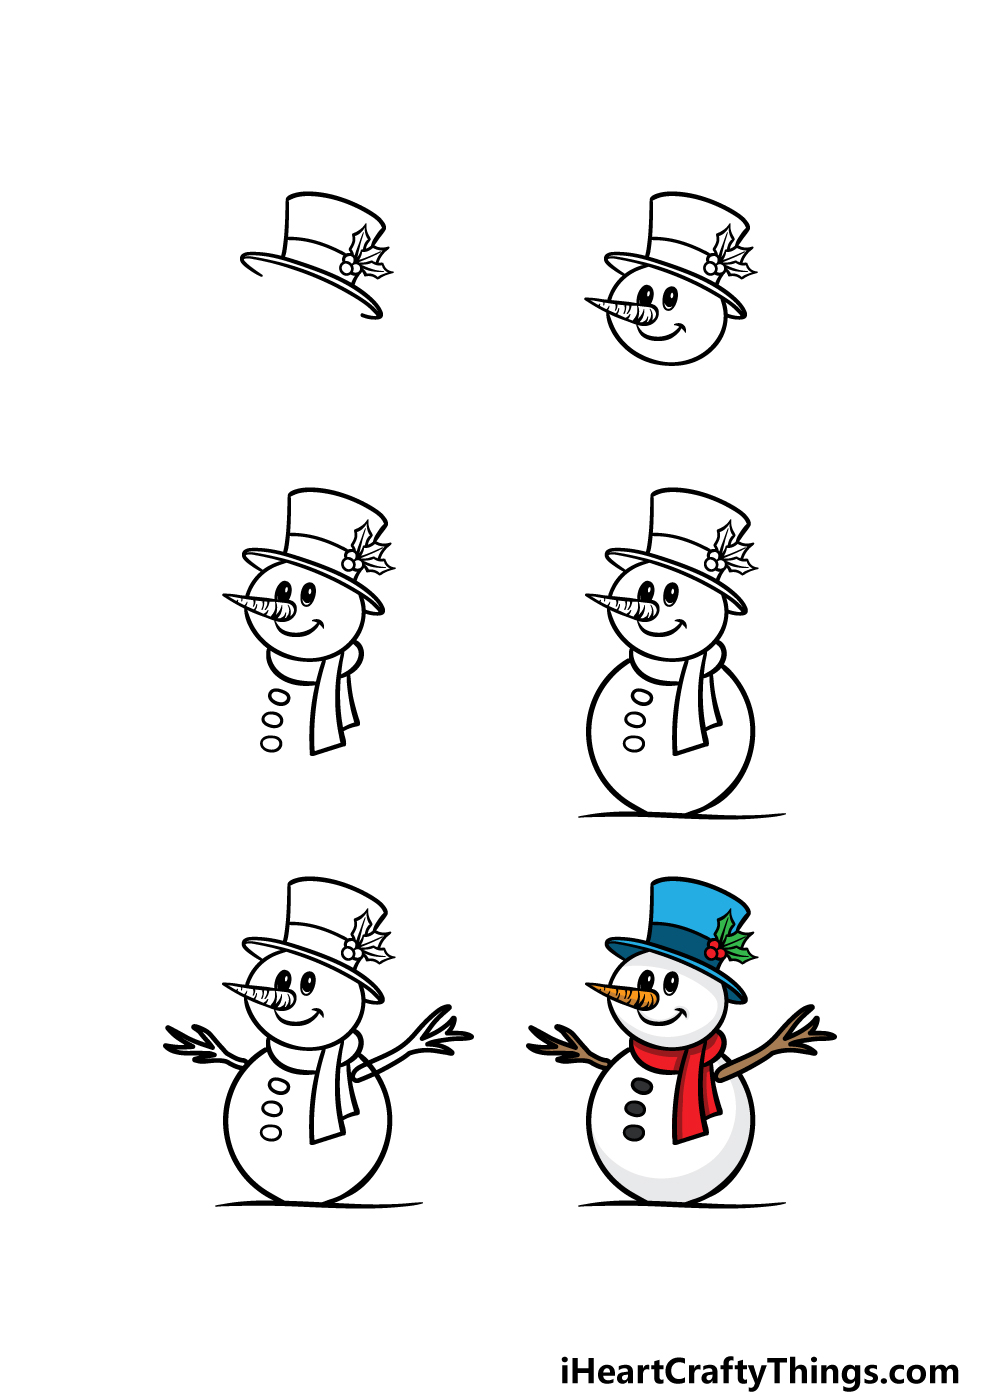 how to draw a cartoon snowman in 6 steps